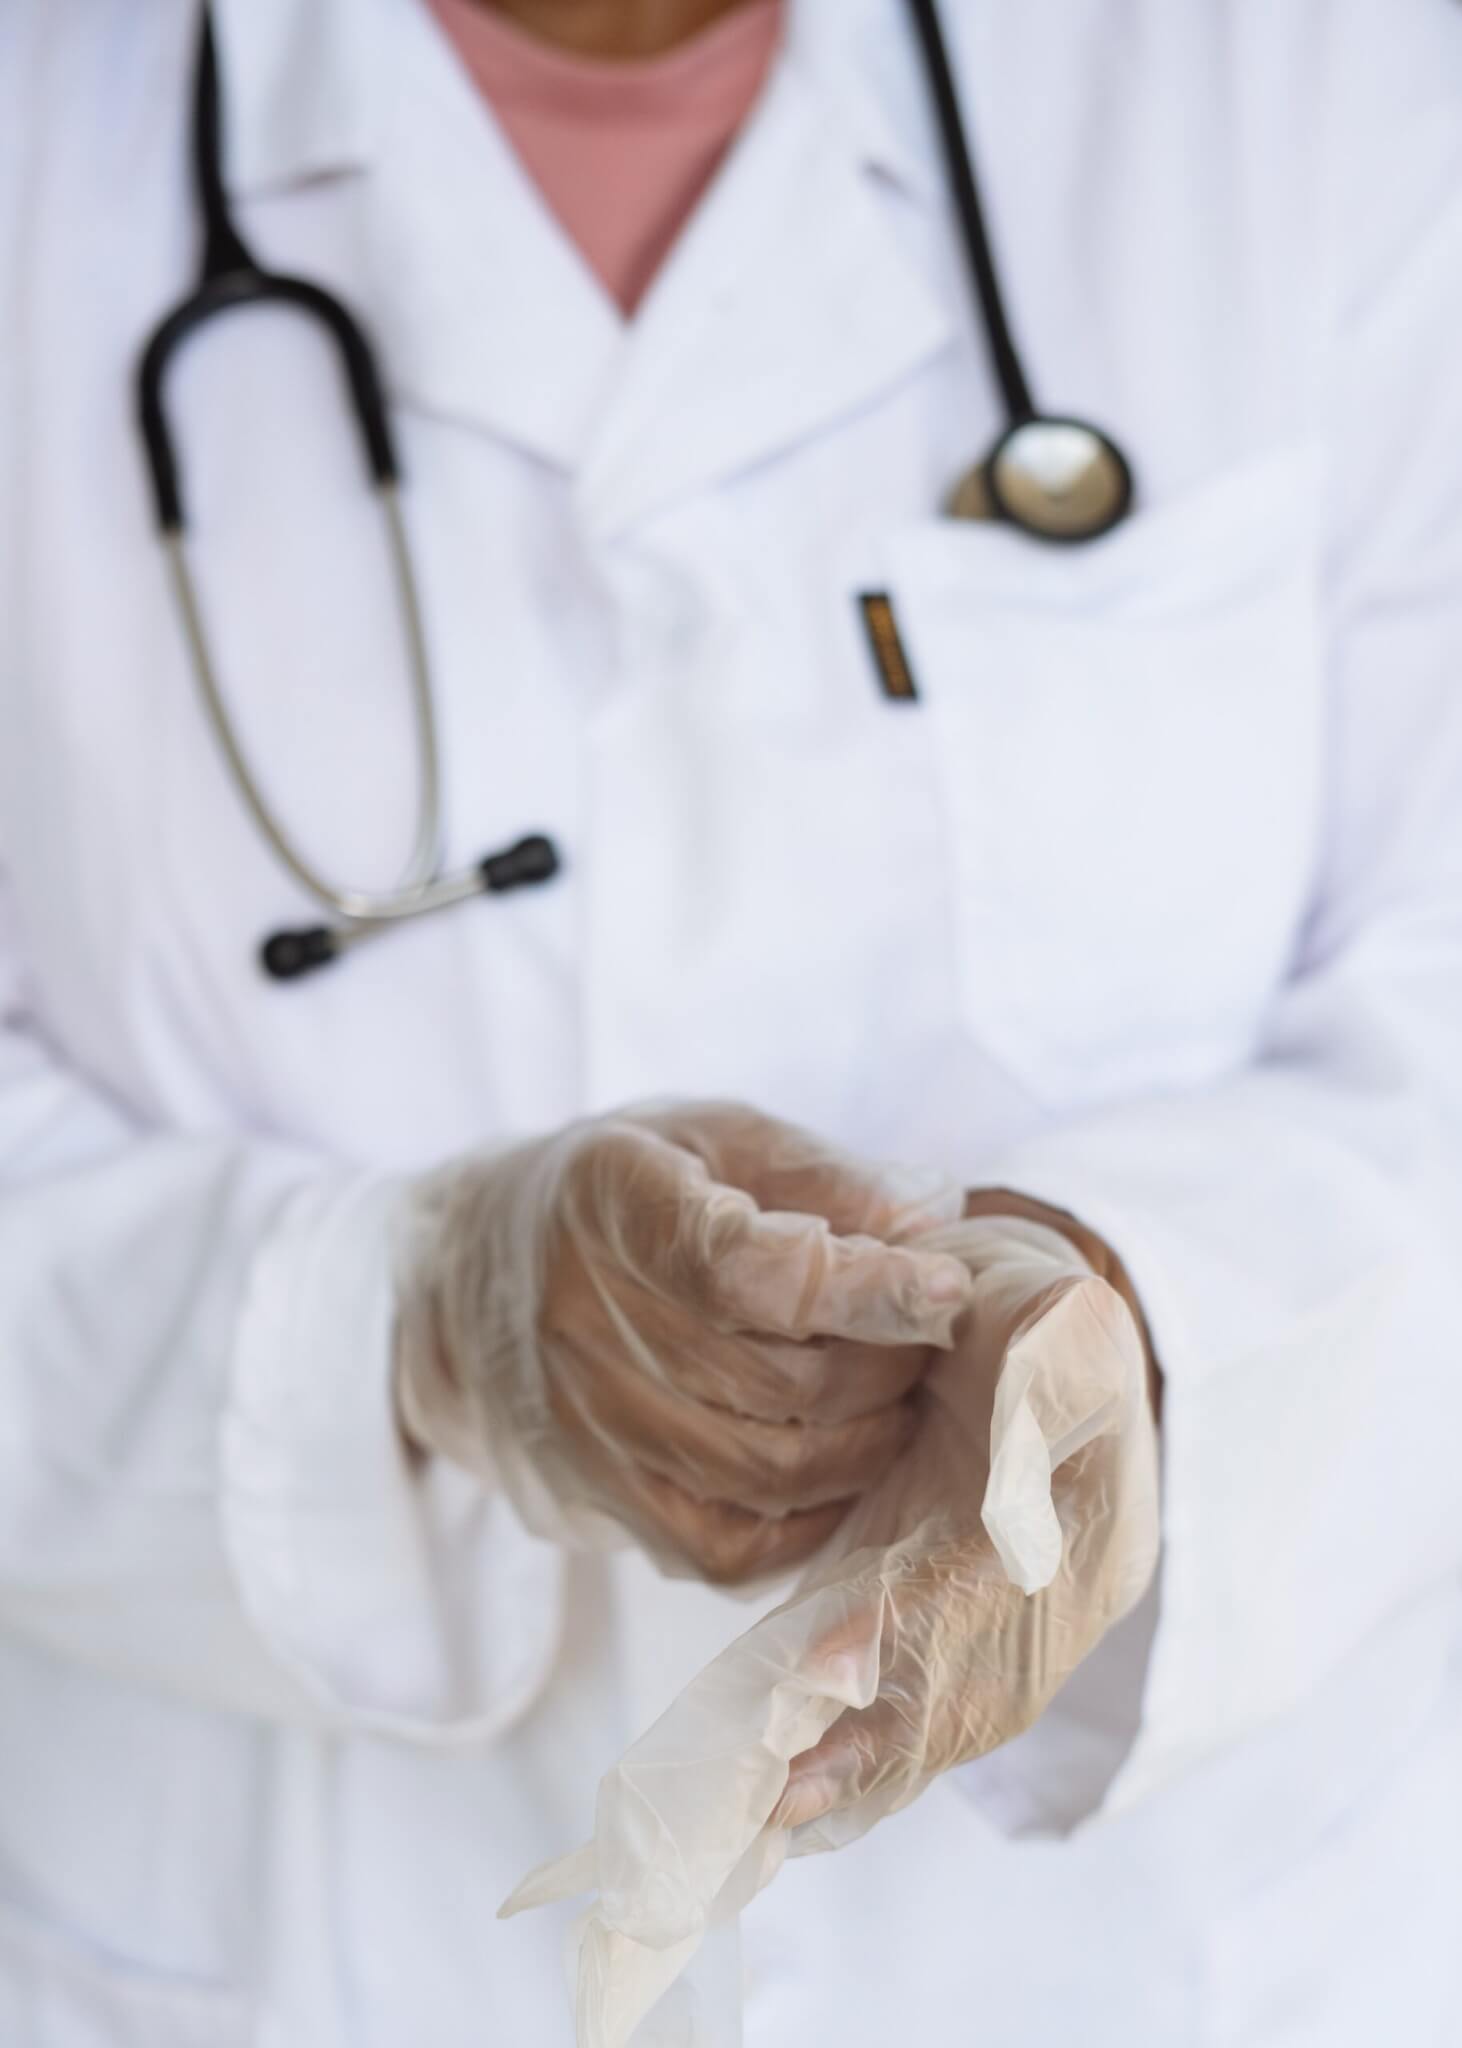 close up of doctor in white coat with stethoscope around neck picture focused on the gloved hands